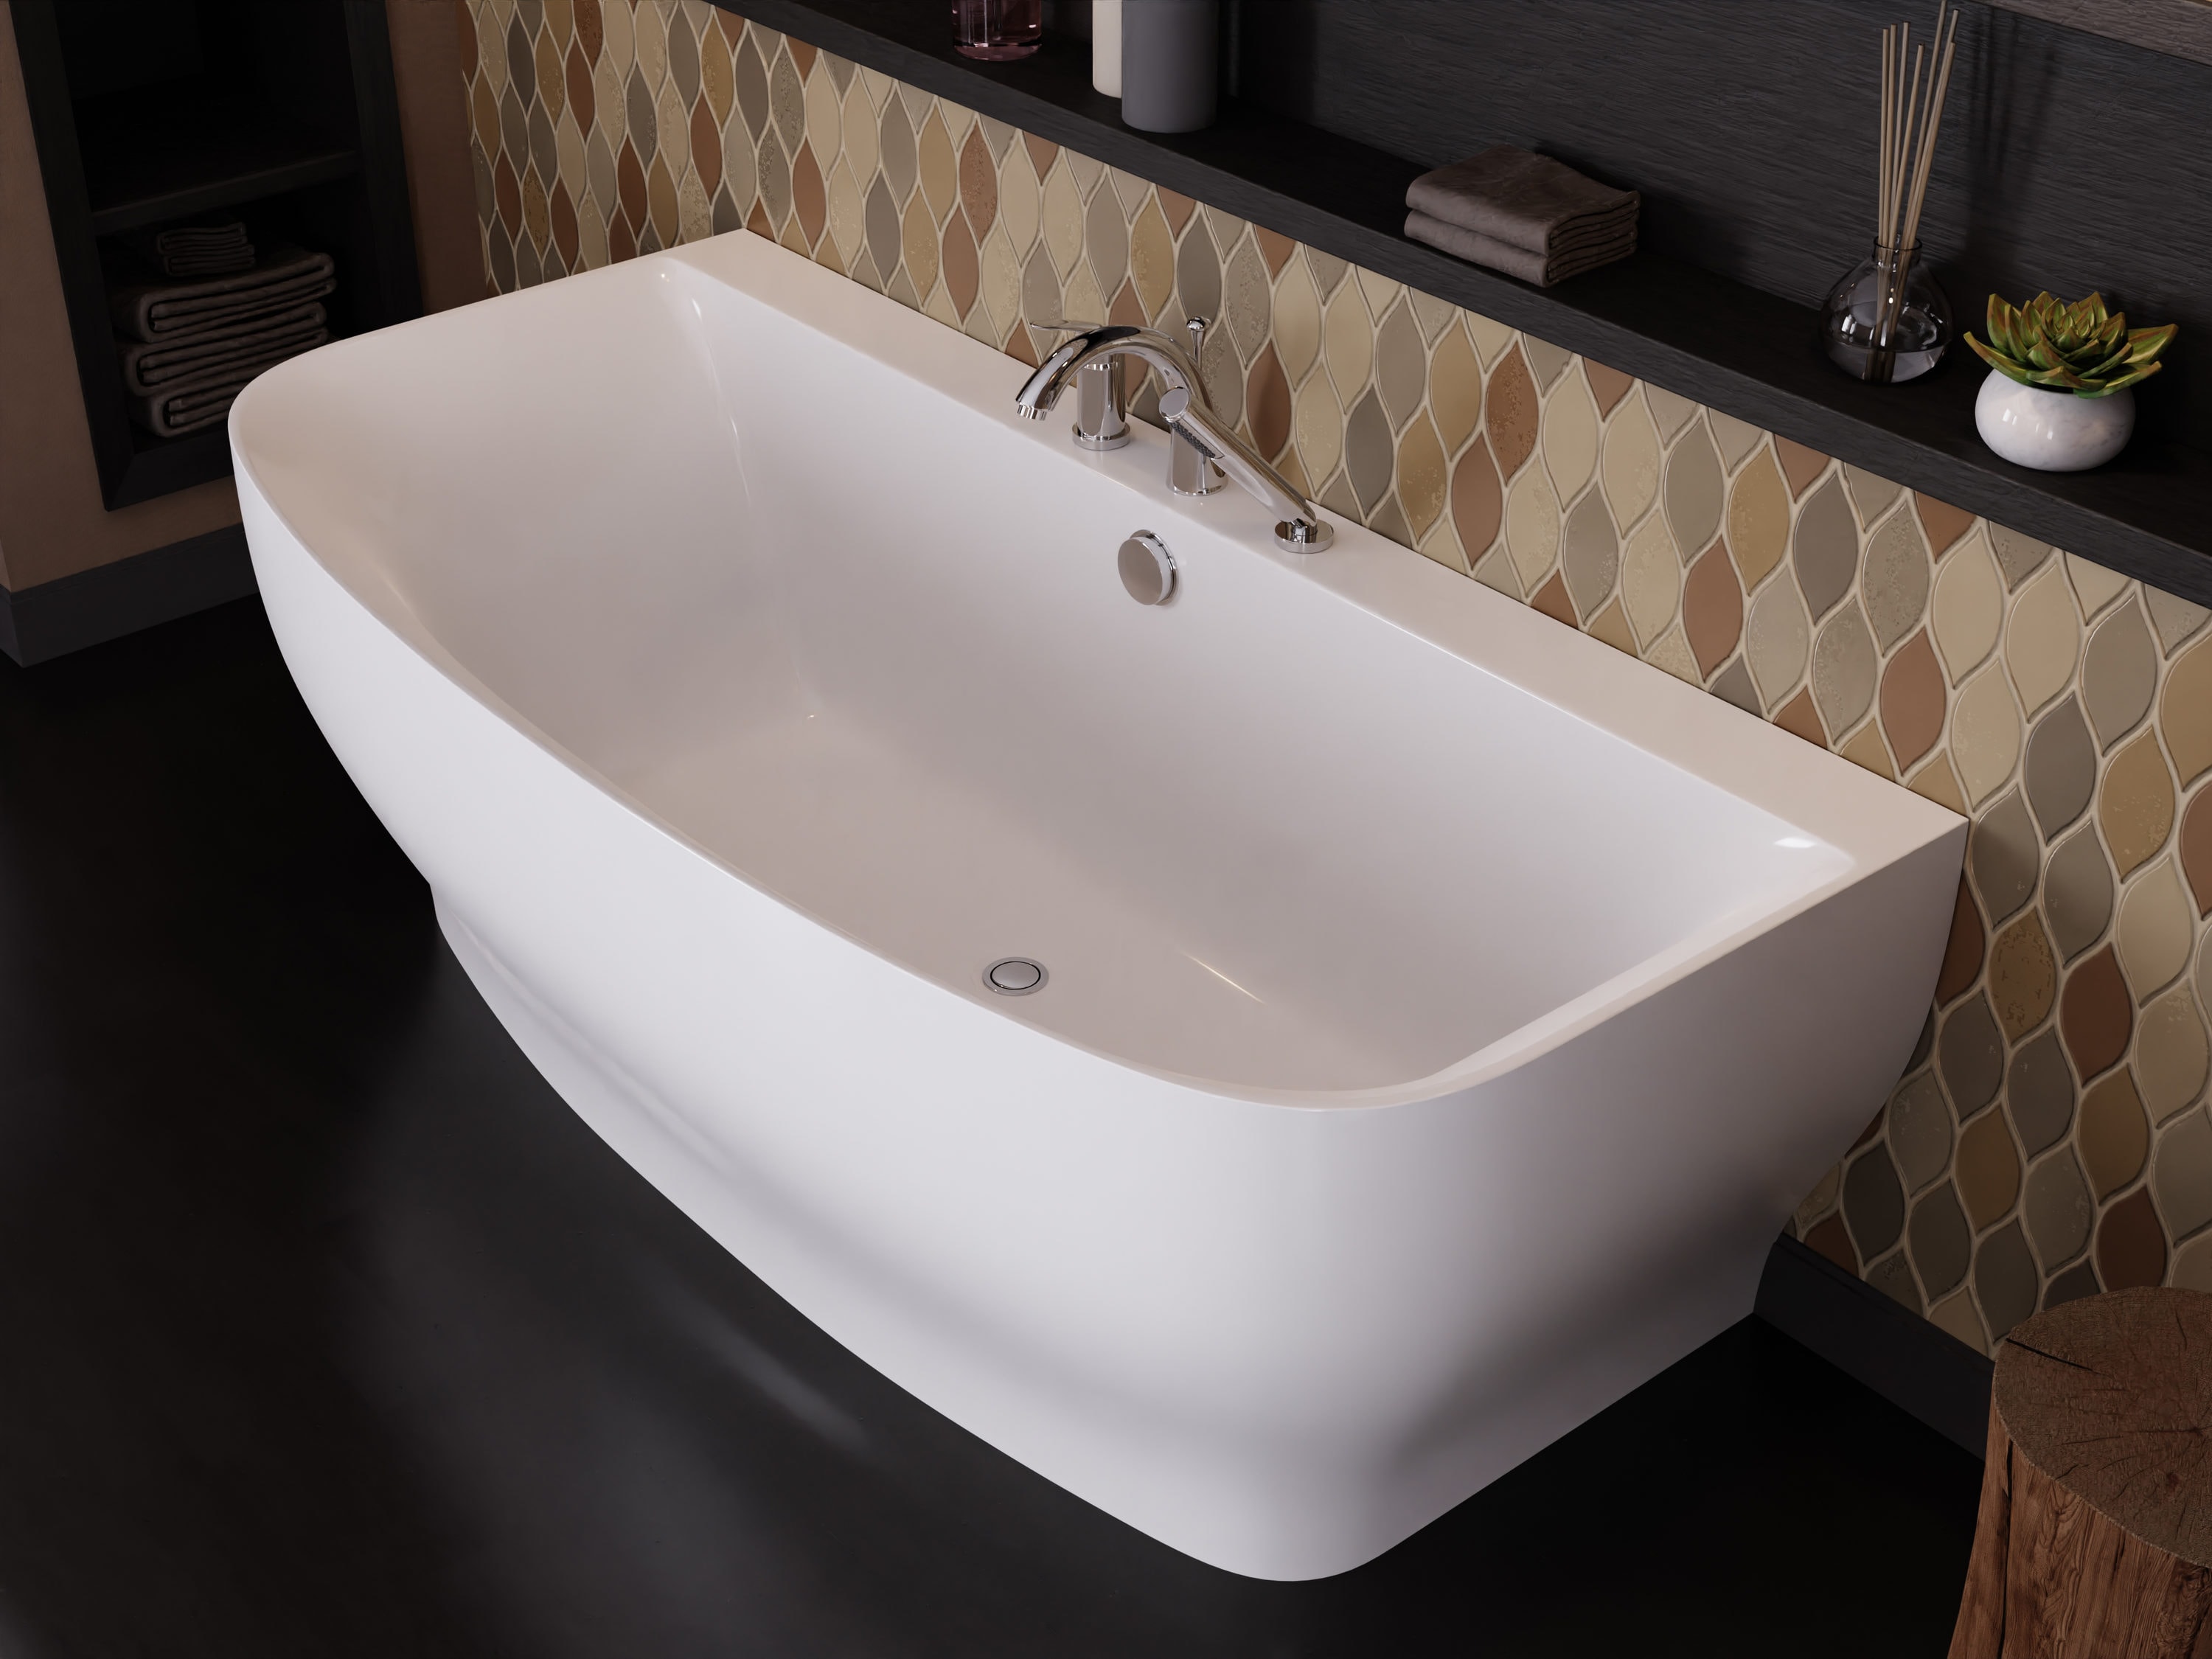 2753FLWR - Anzzi Right Drain Fully Loaded Walk-In Bathtub with Air Jets and Whirlpool Massage Jets Hot Tub | Quick Fill Waterfall Tub Filler with 6